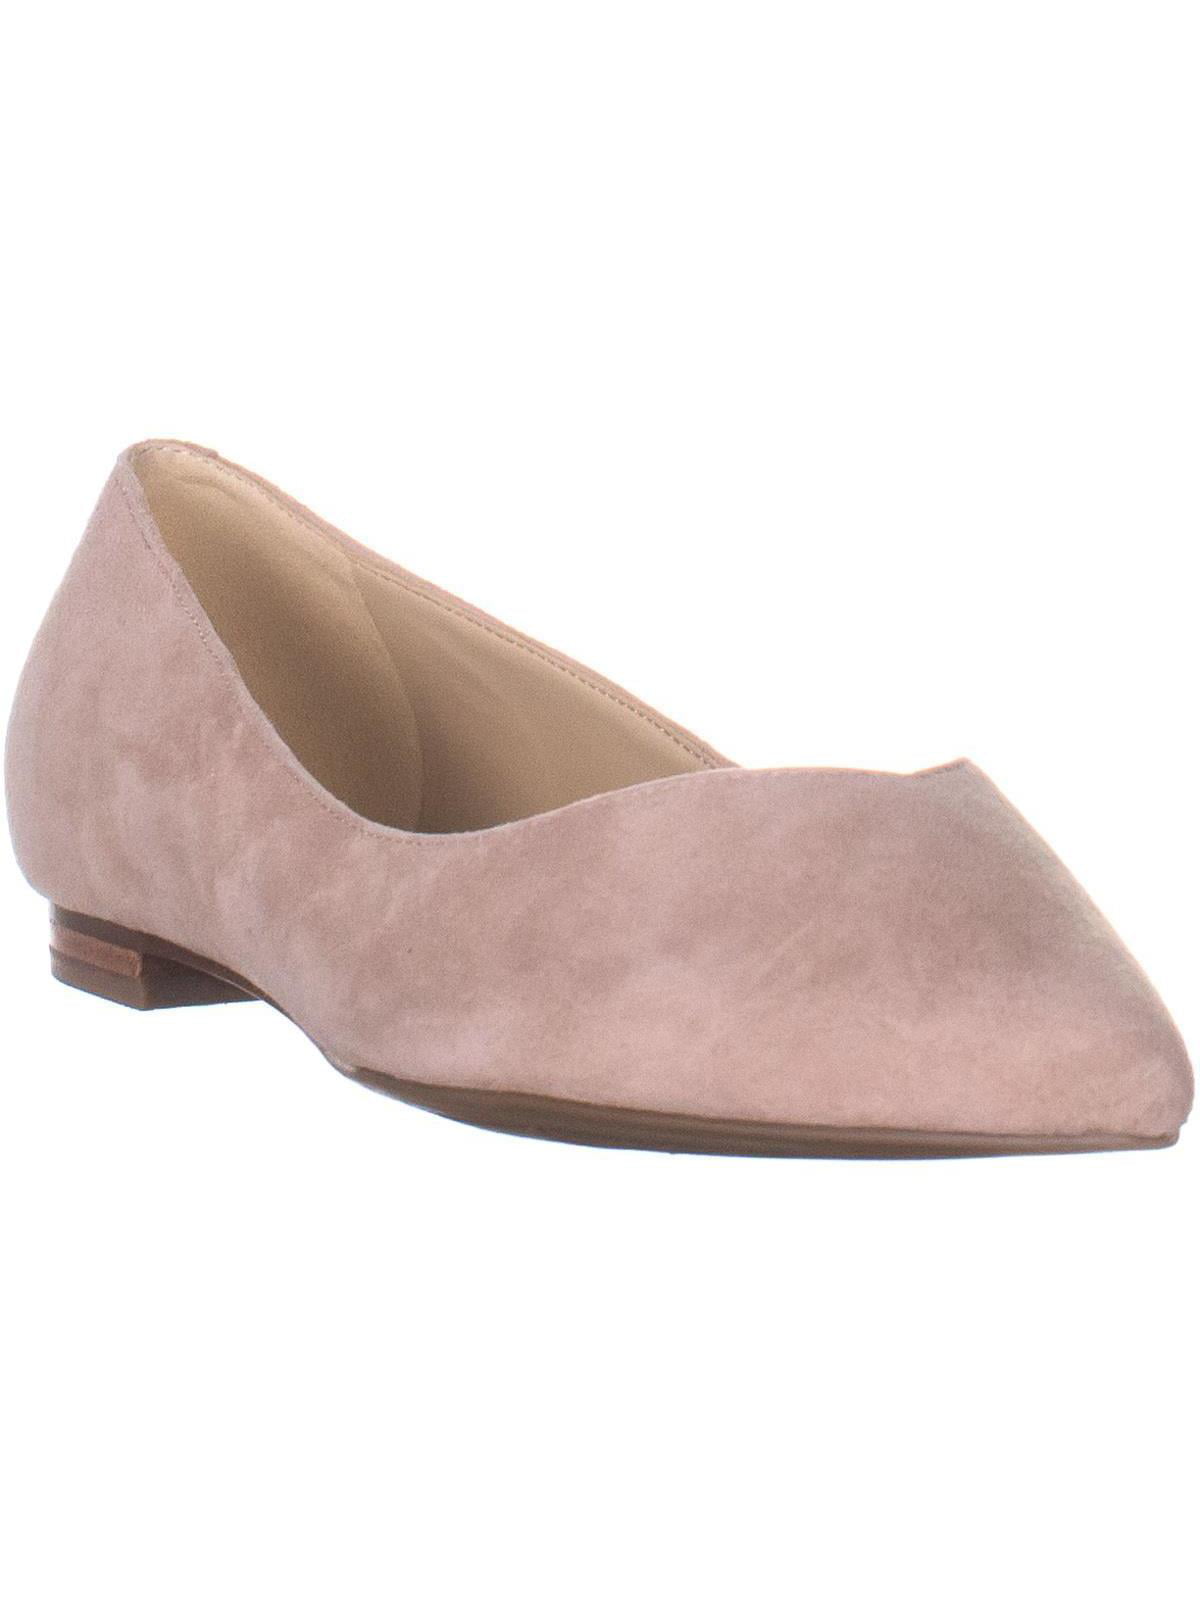 Womens Marc Fisher Analia Pointed Toe Ballet Flats, Light Pink Suede, 6 ...